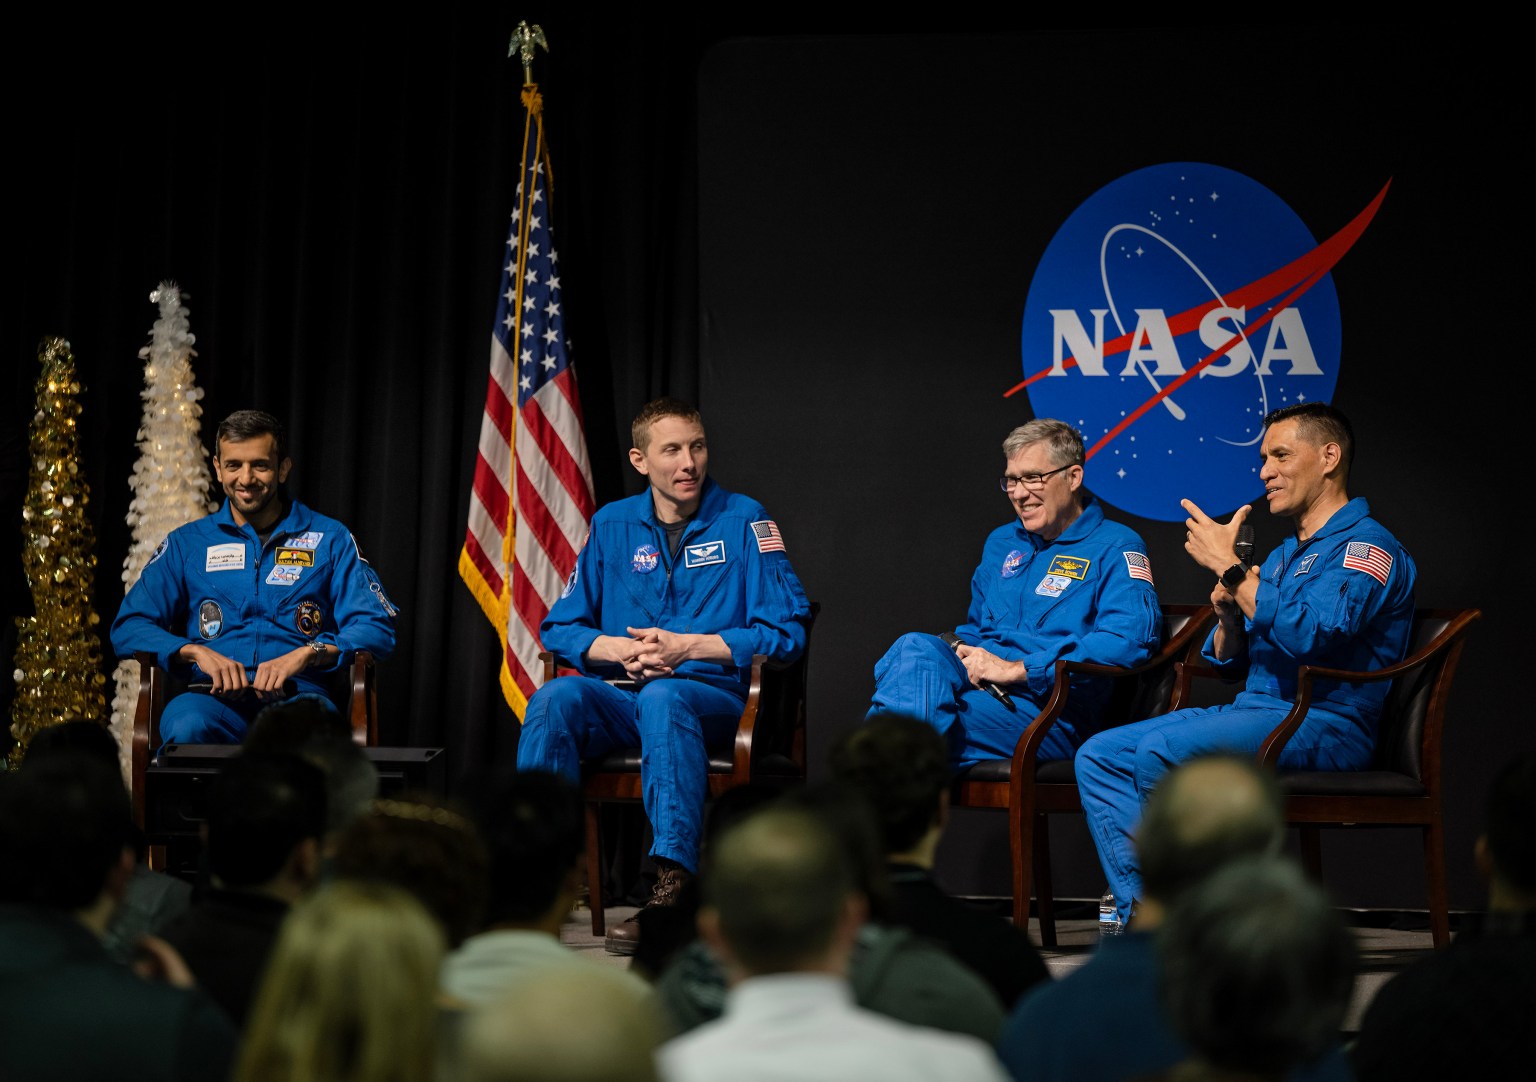 From left, Alneyadi, Hoburg, Bowen, and Rubio answer questions during the Marshall team member Q&A portion of their visit.